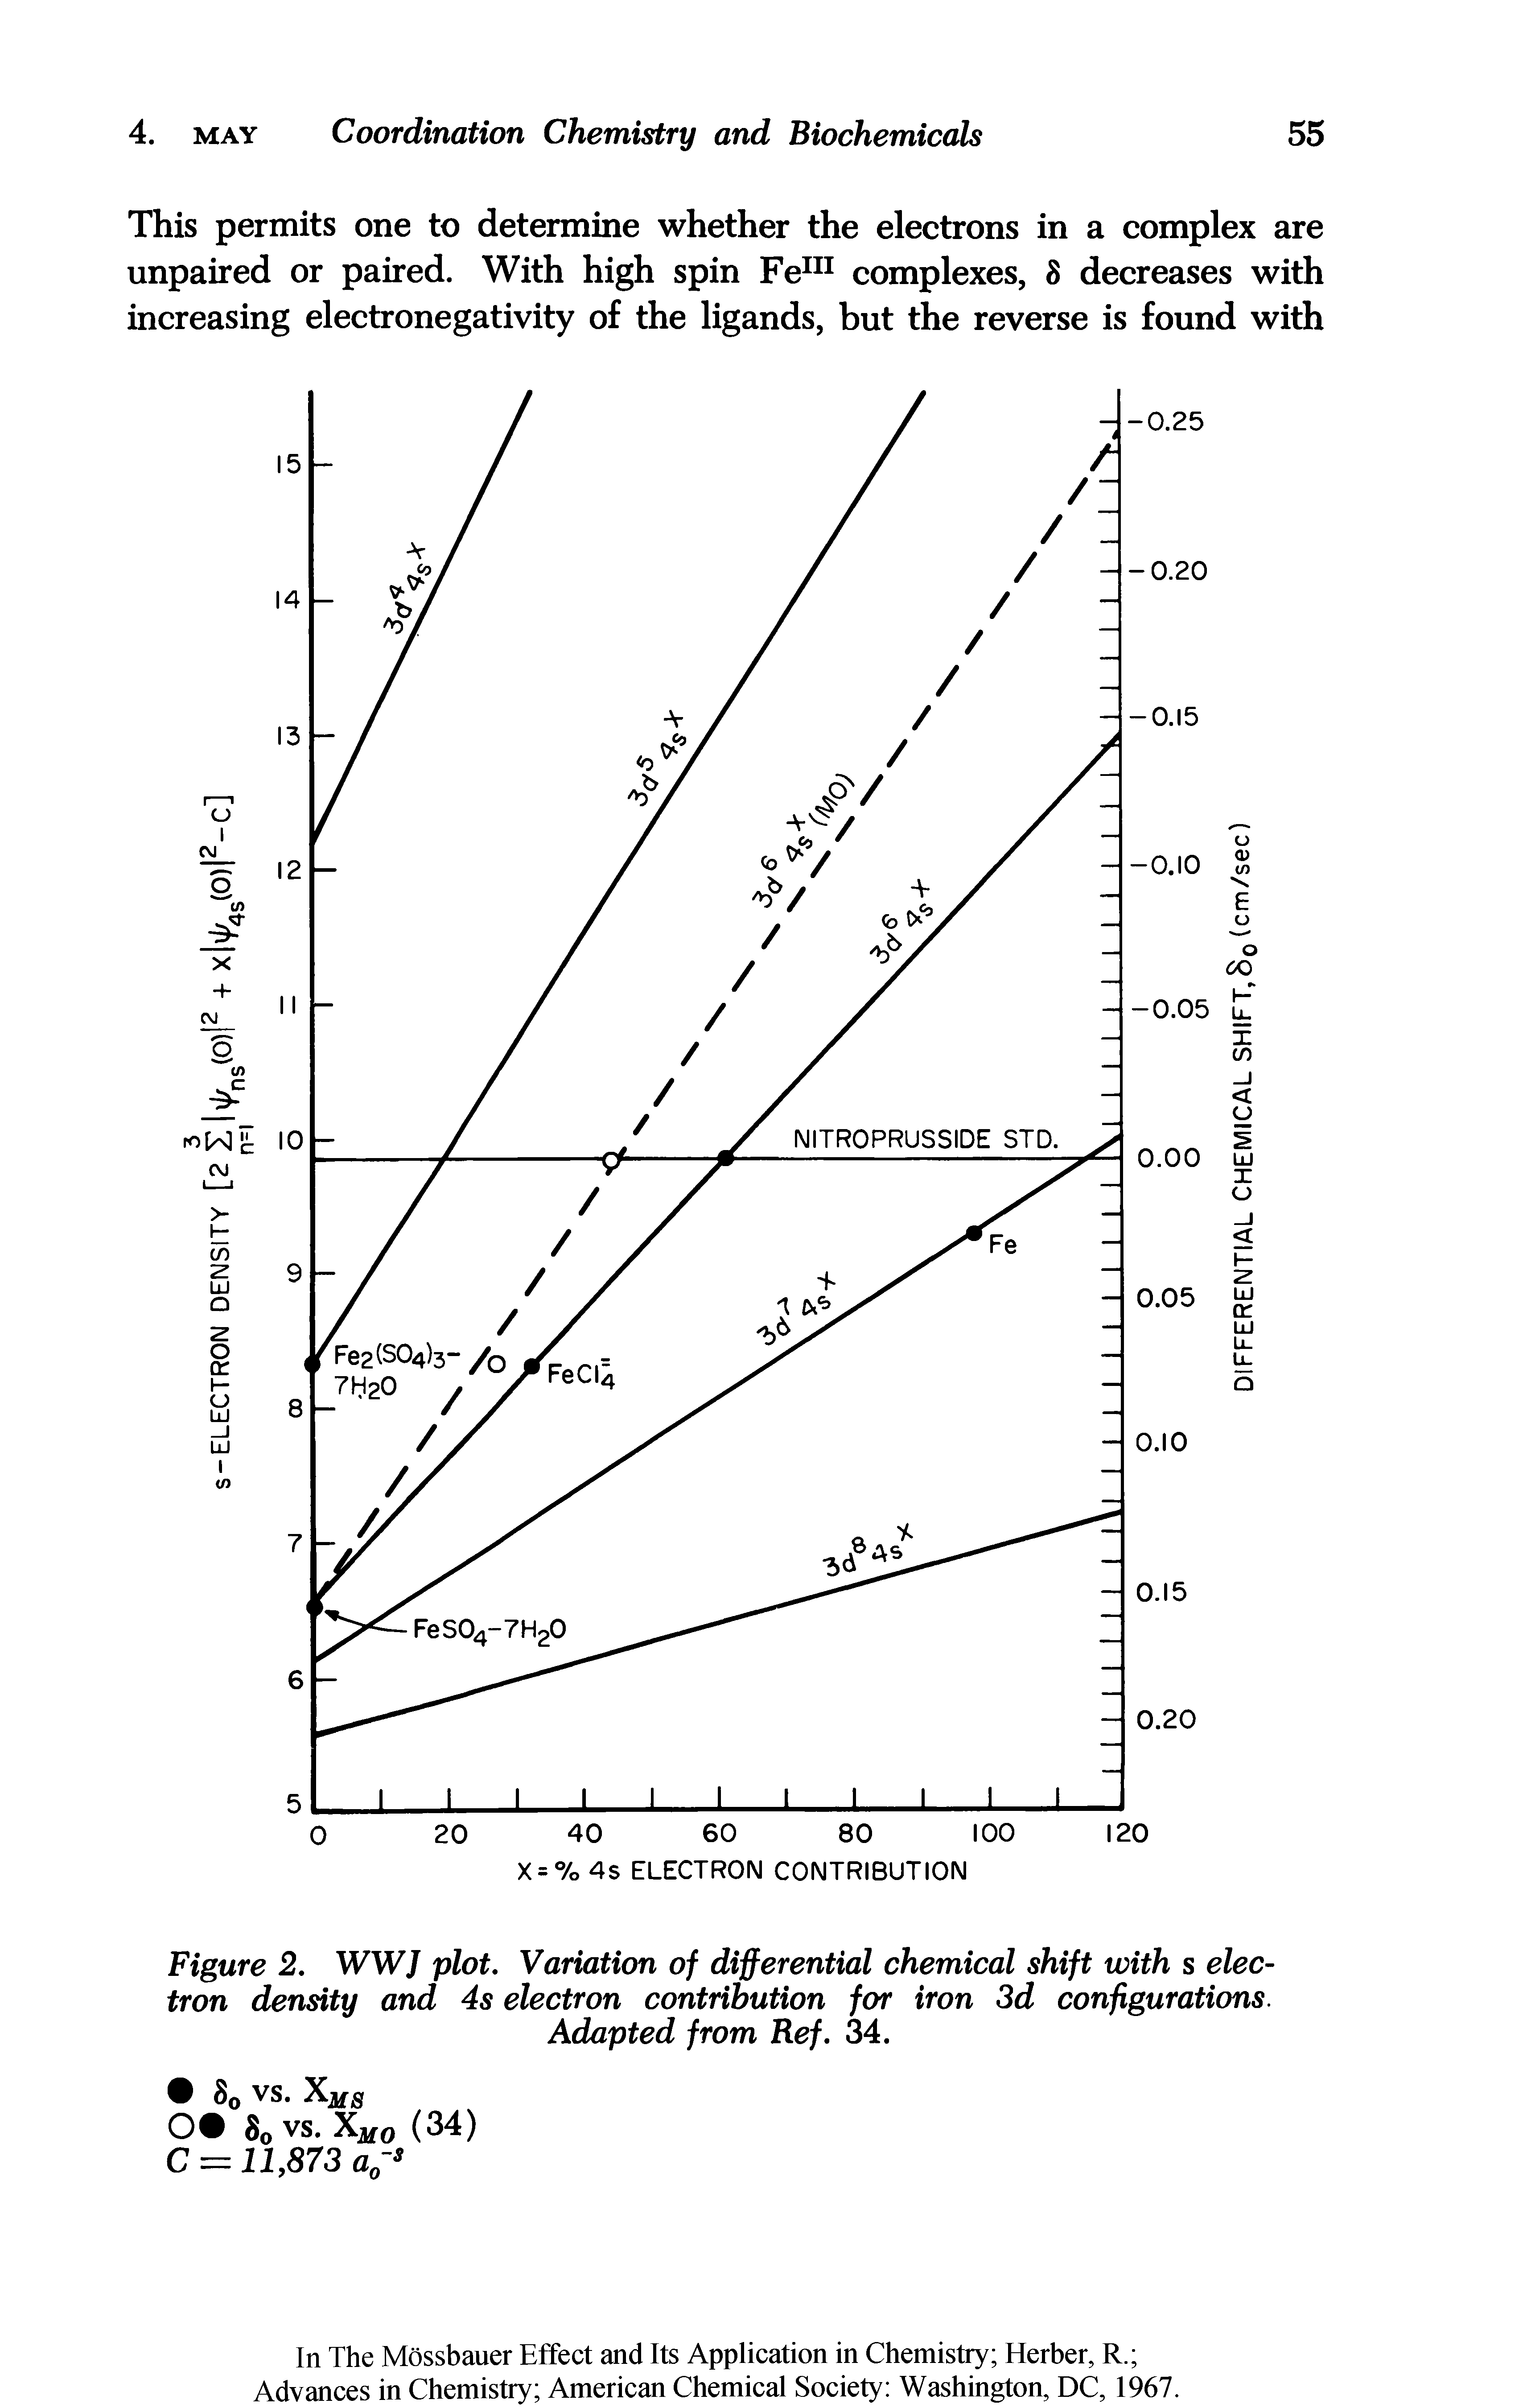 Figure 2, WWJ plot. Variation of differential chemical shift with s electron density and 4s electron contribution for iron 3d configurations. Adapted from Ref. 34.